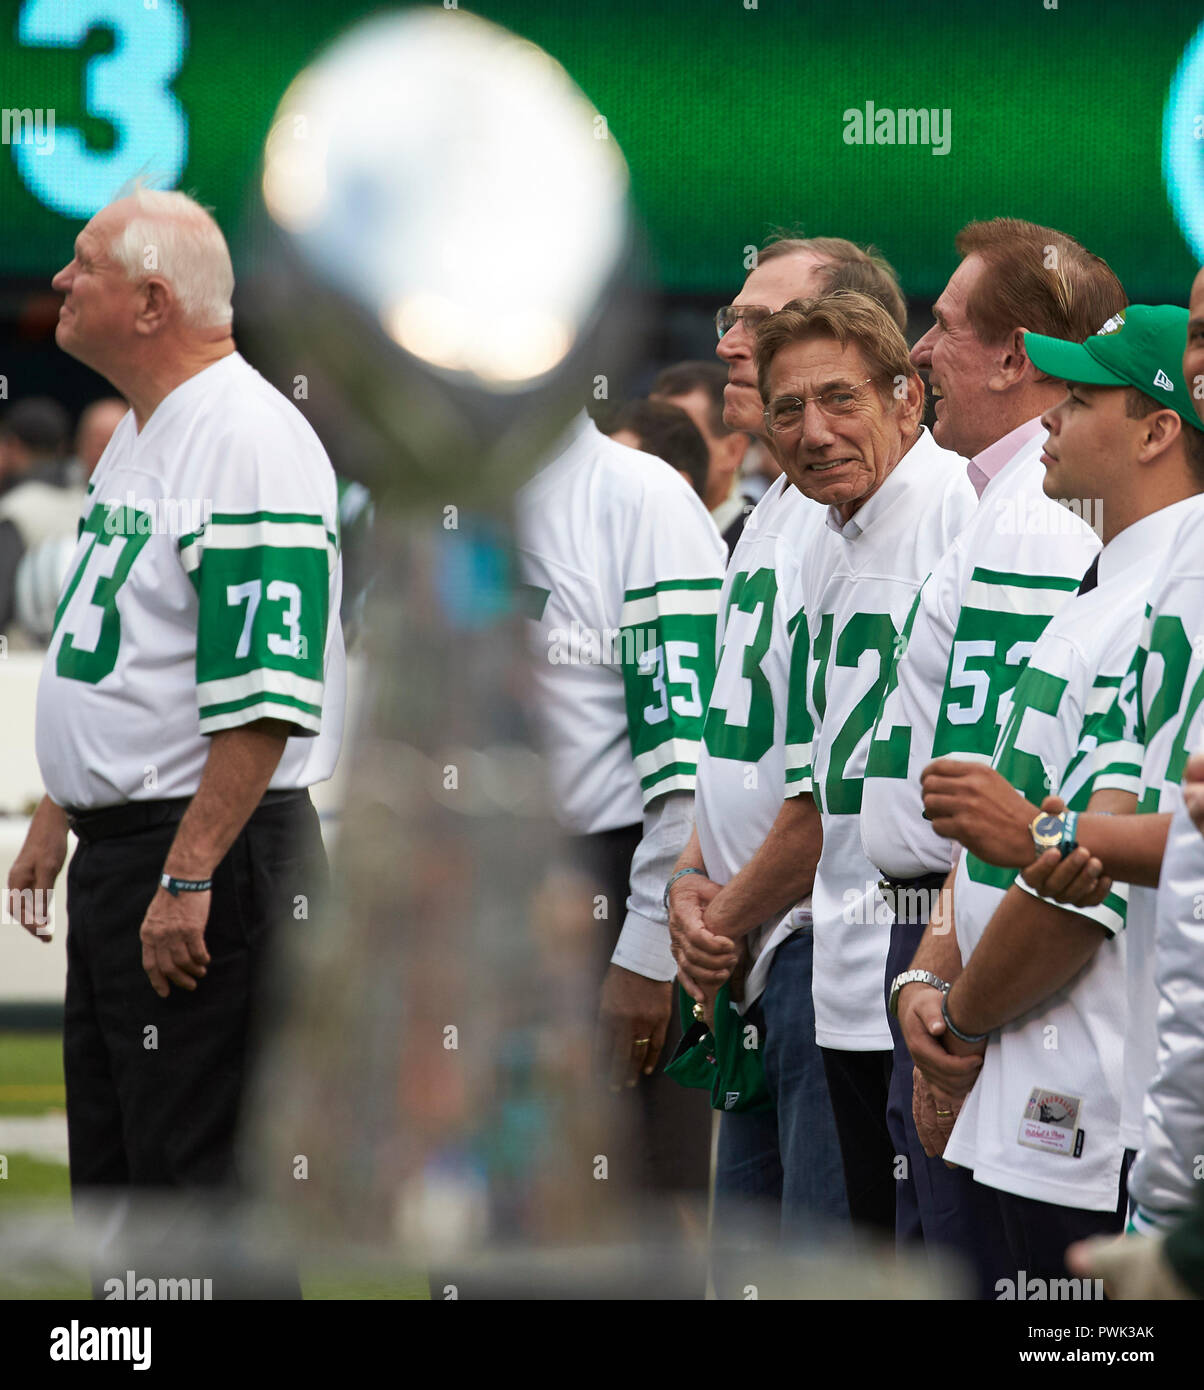 October 14, 2018 - East Rutherford, New Jersey, U.S. - Joe Namath during  the Super Bowl III 50th Anniversary celebration during halftime of the game  between the Indianapolis Colts and the New